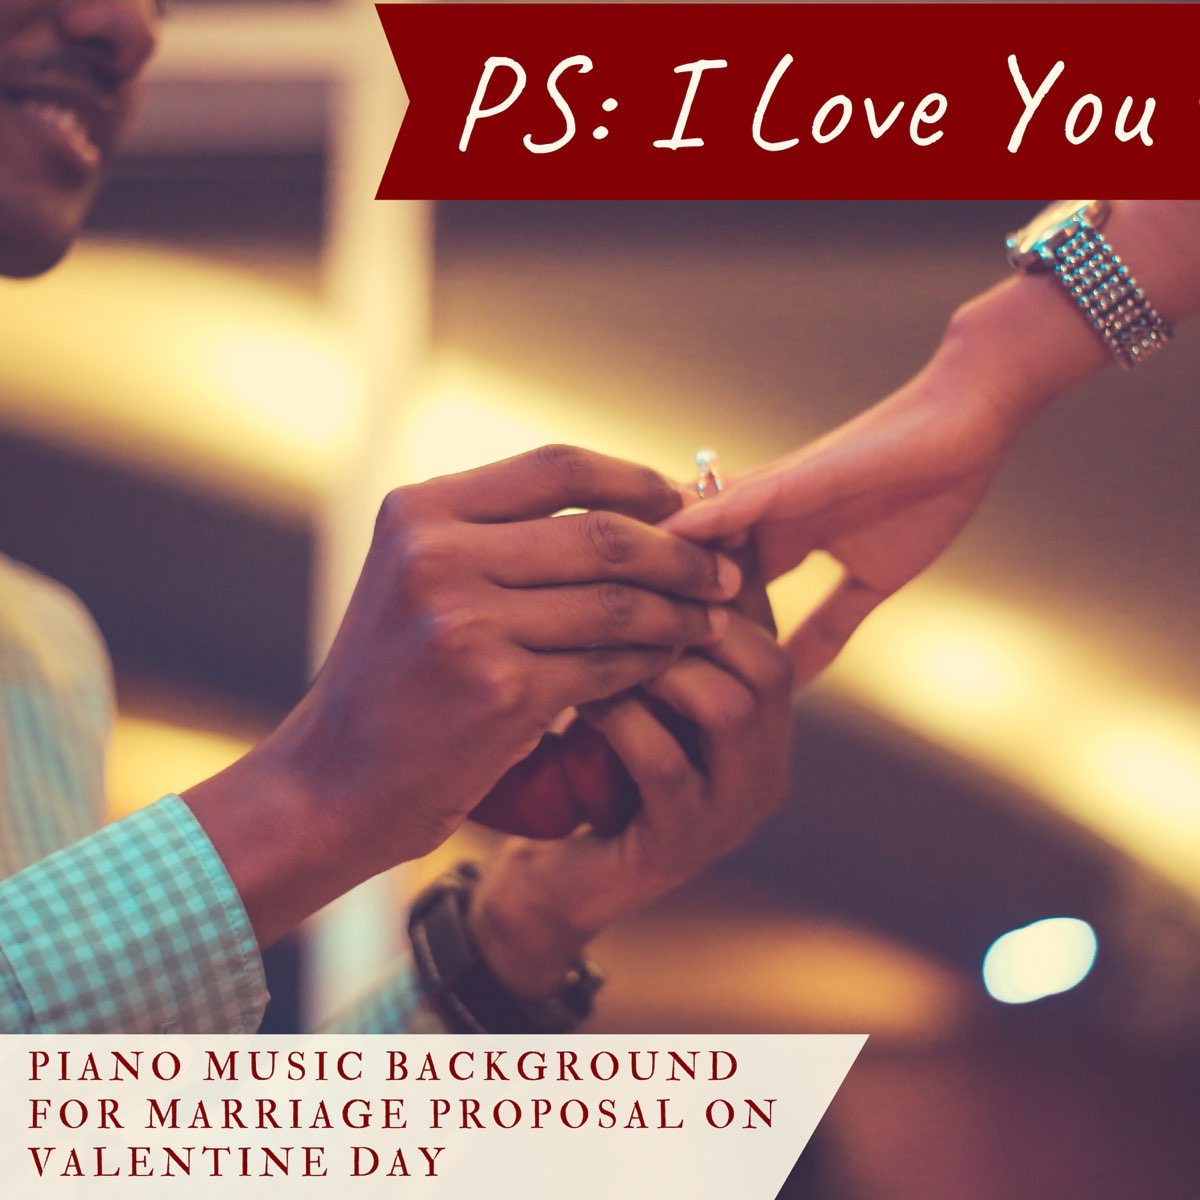 PS: I Love You - Piano Music Background for Marriage Proposal on Valentine  Day by Wedding Music Ensemble on Apple Music